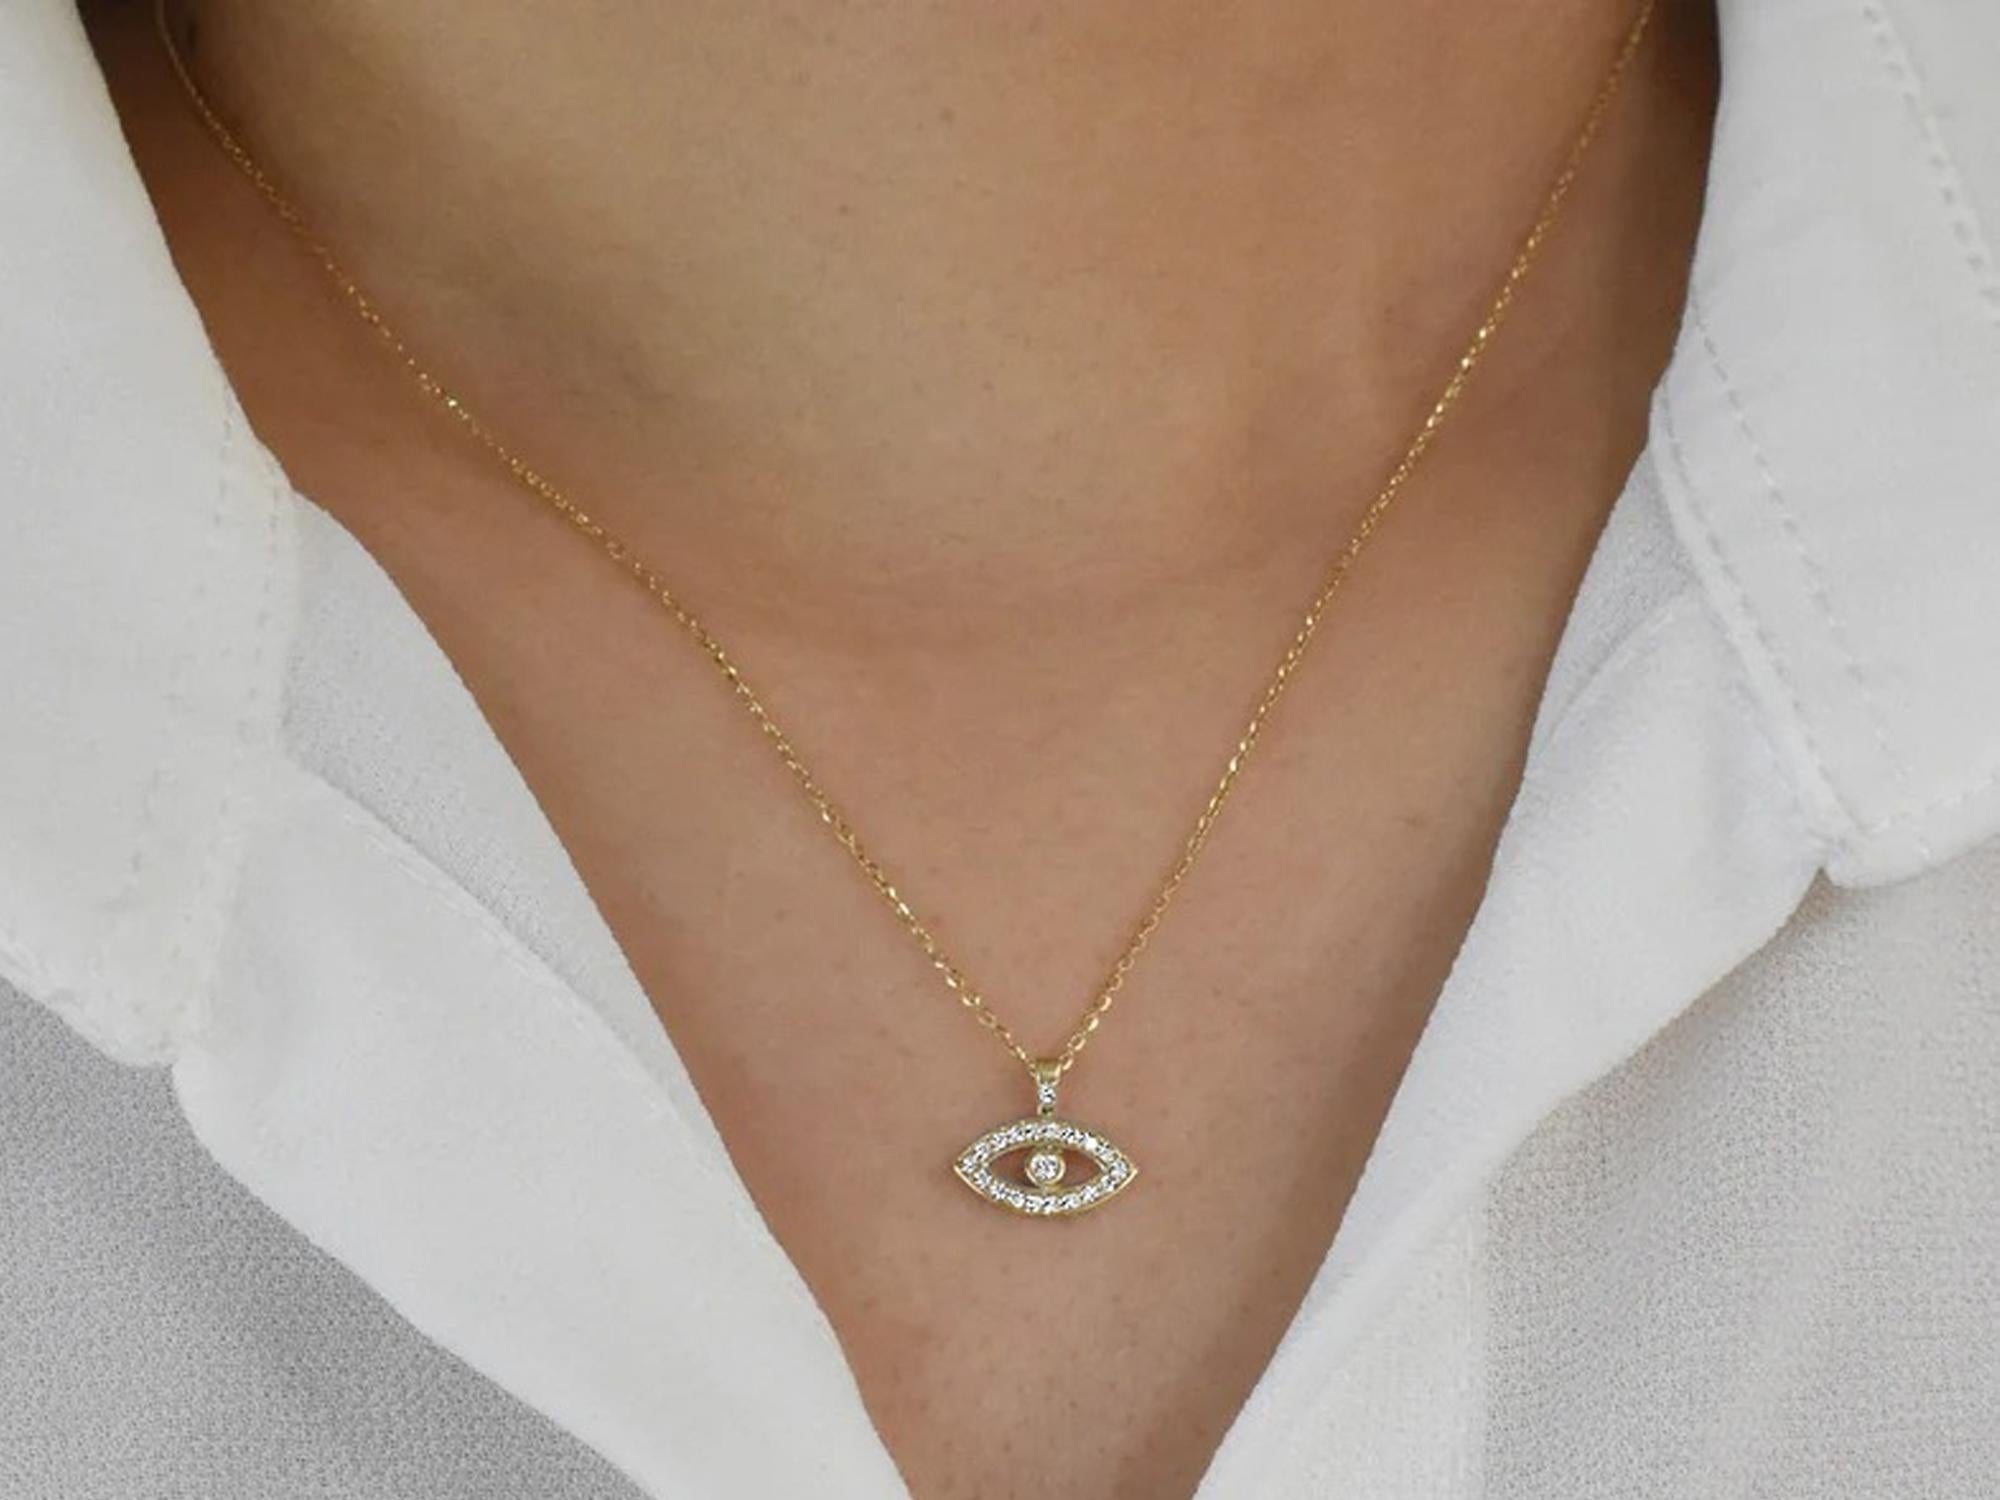 The beautiful little Evil Eye pendant is made from 14k solid gold adorned with natural white round cut diamonds. This necklace is designed to protect the wearer from the negativity and evil around. Perfect for wearing by itself for a minimal